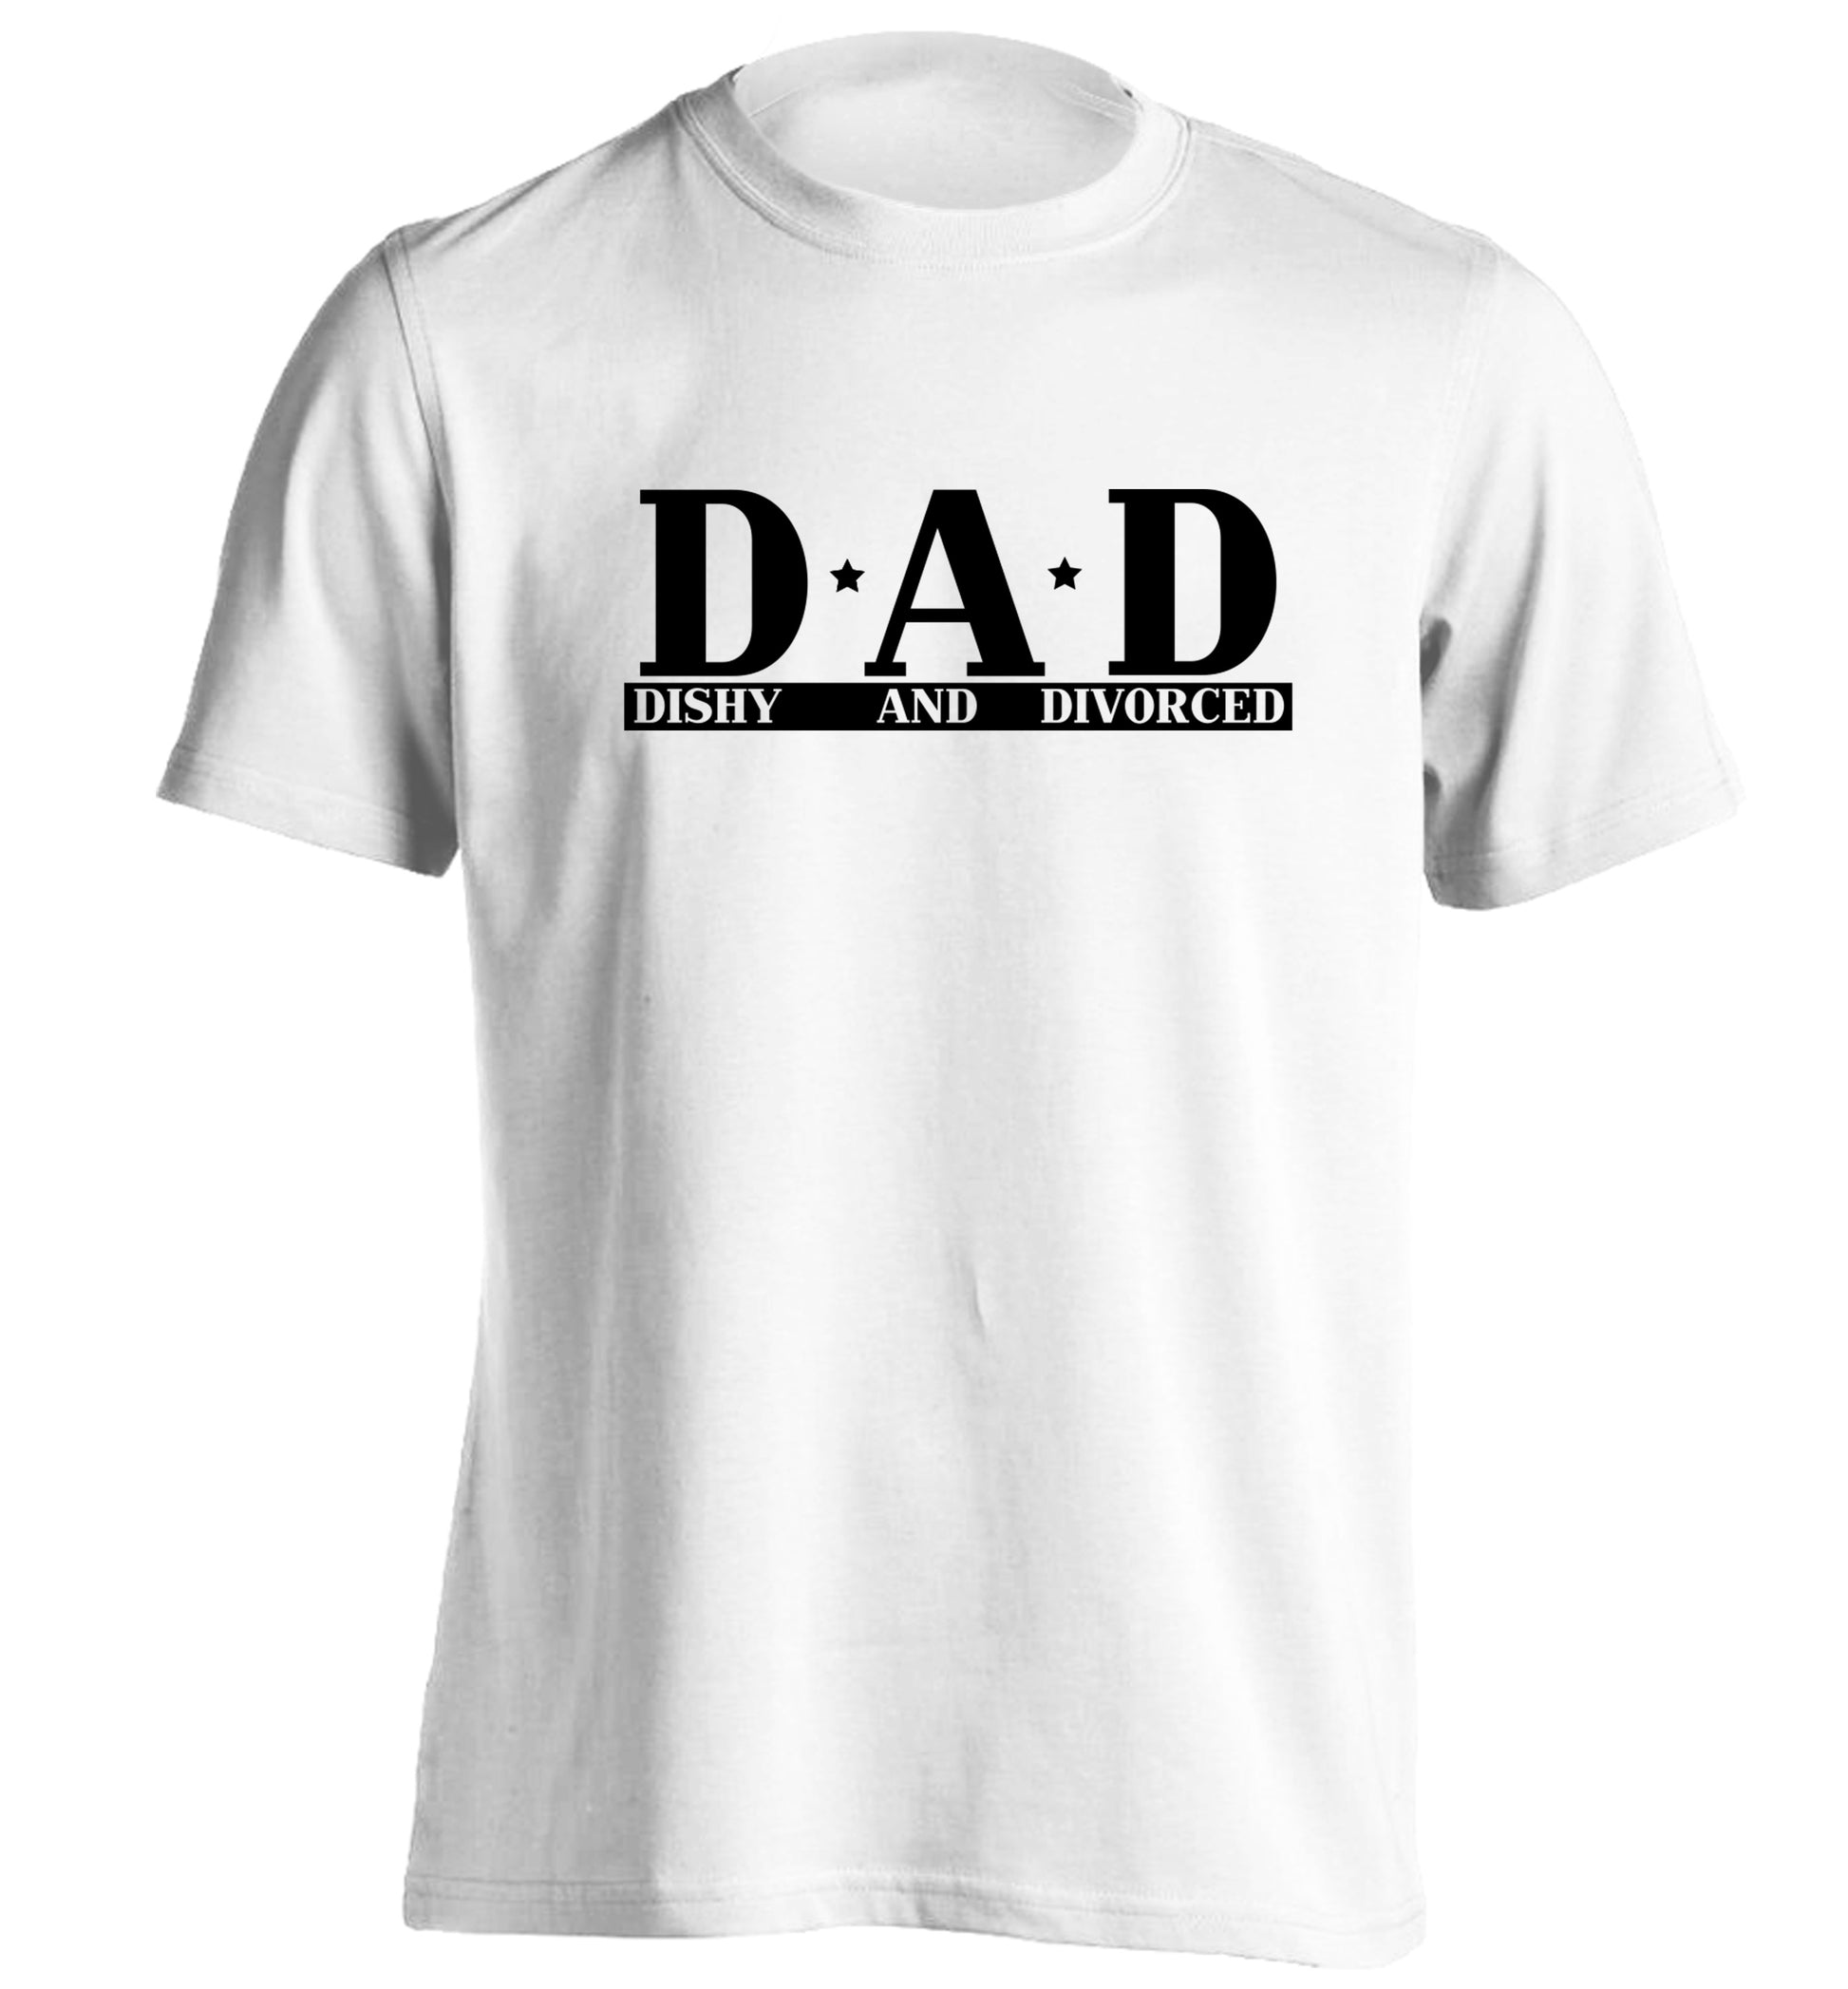 D.A.D meaning Dishy and Divorced adults unisex white Tshirt 2XL